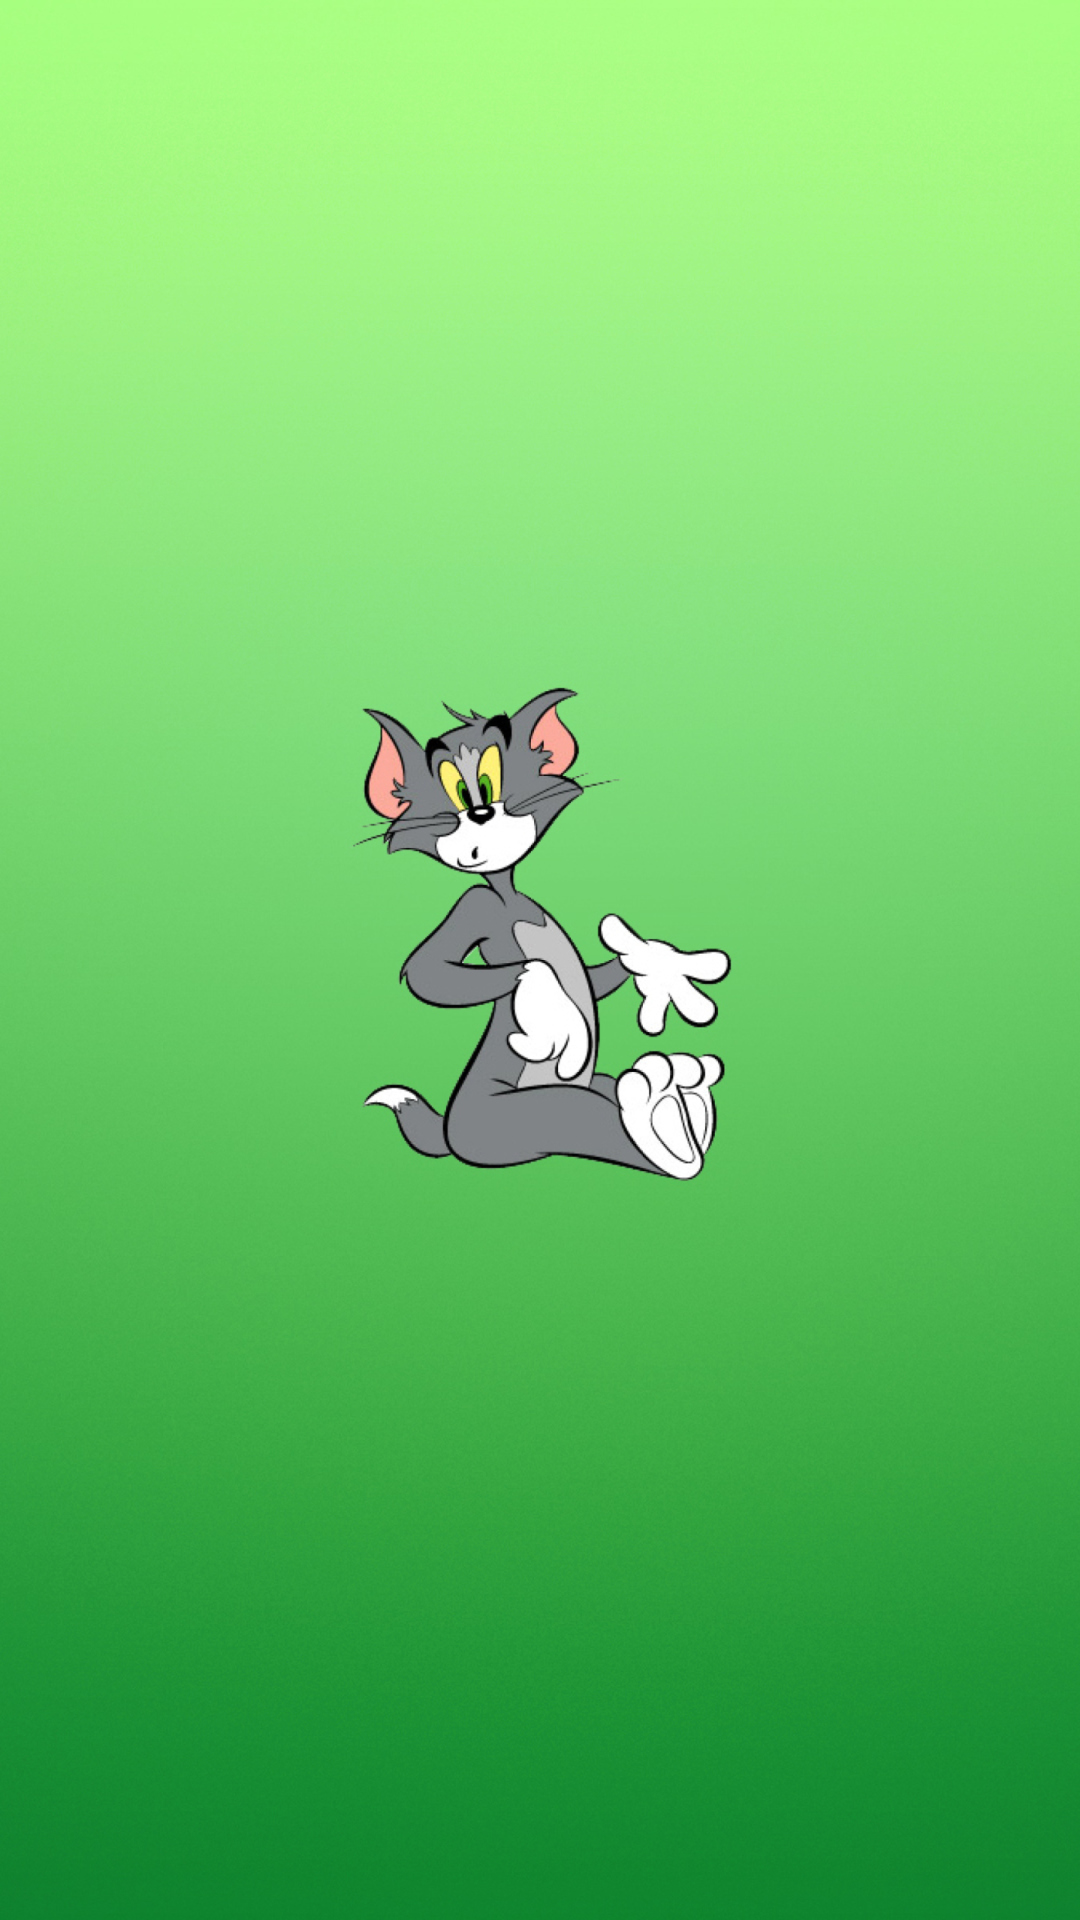 Tom & Jerry Wallpaper for iPhone 6 Plus